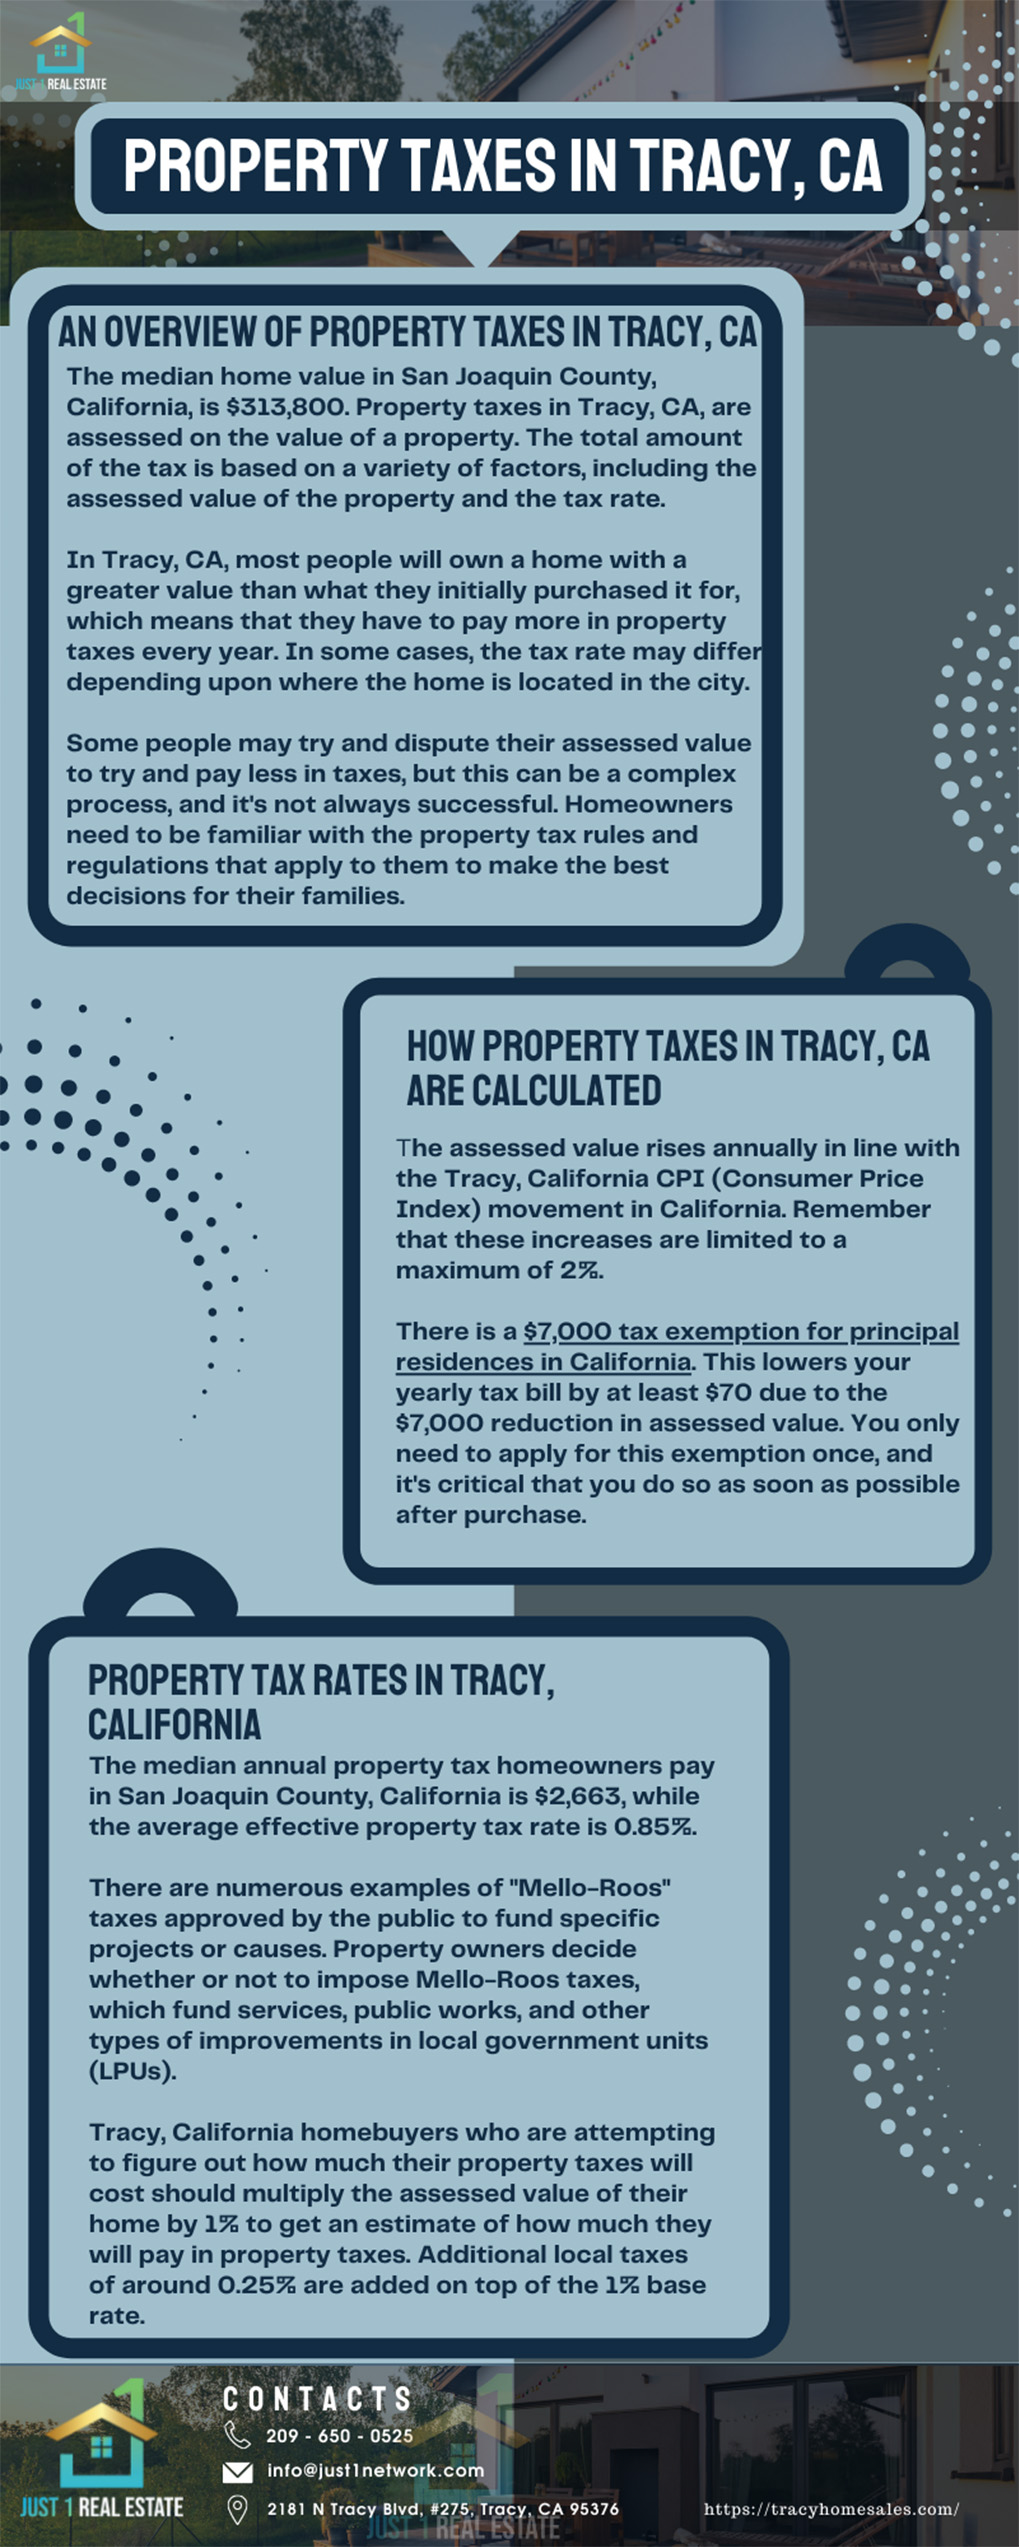 Property Taxes In Tracy CA infographic